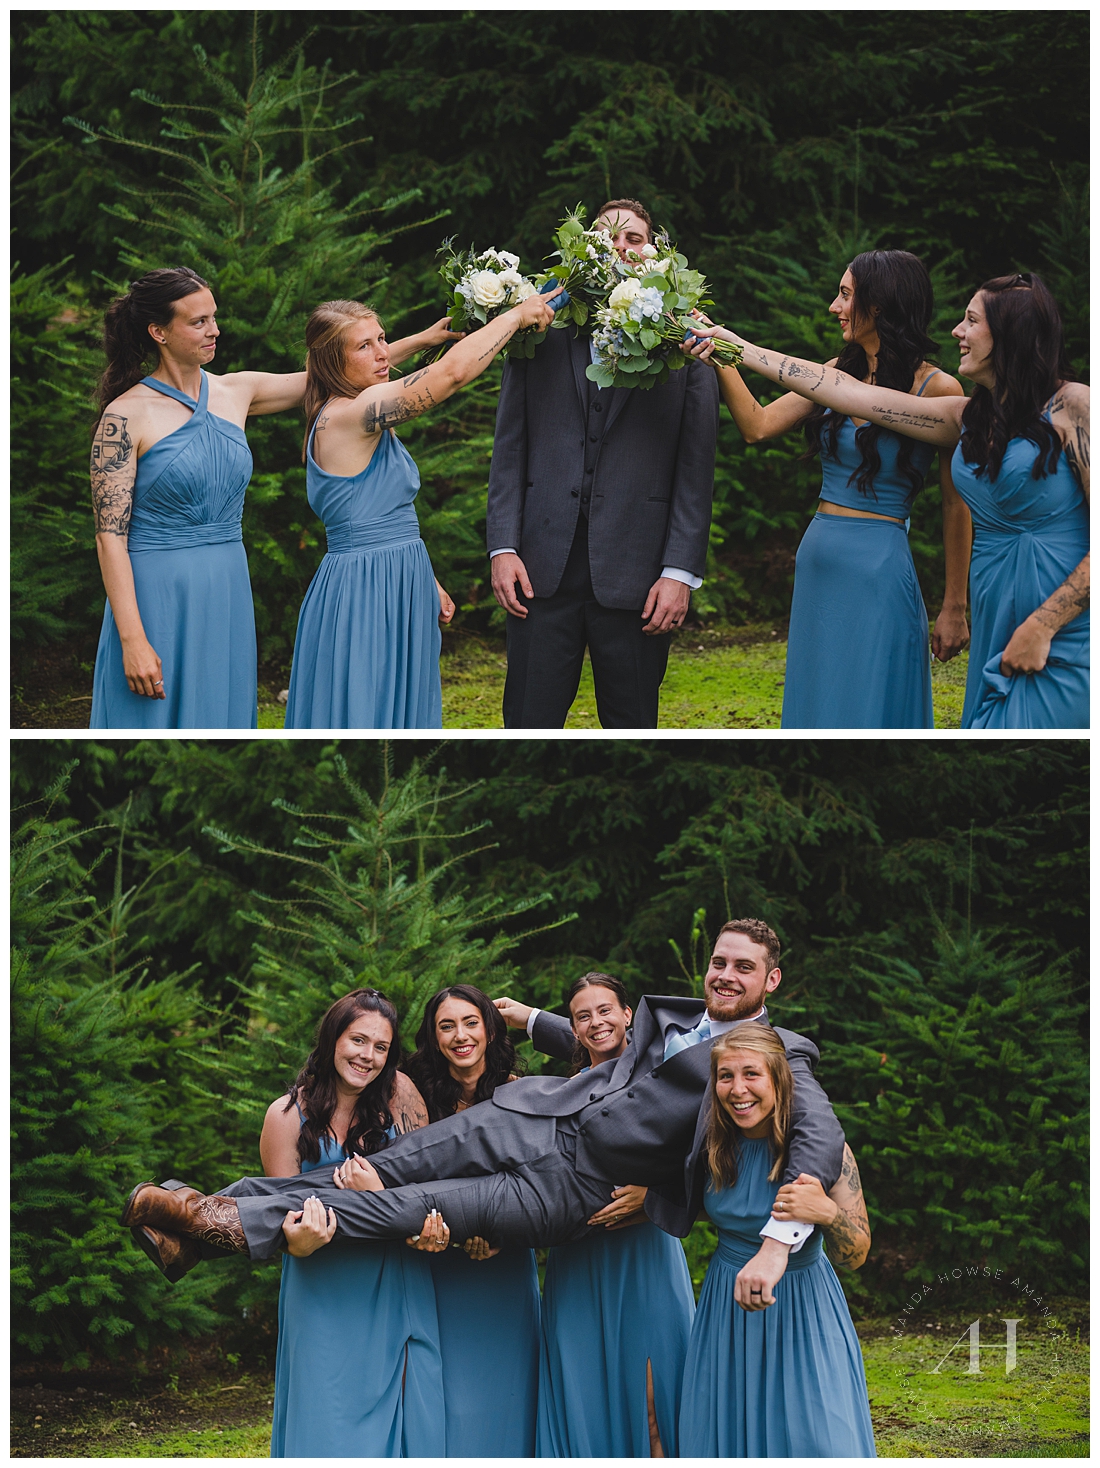 Fun Bridesmaid Poses with Groom | Photographed by the Best Tacoma Wedding Photographer Amanda Howse Photography